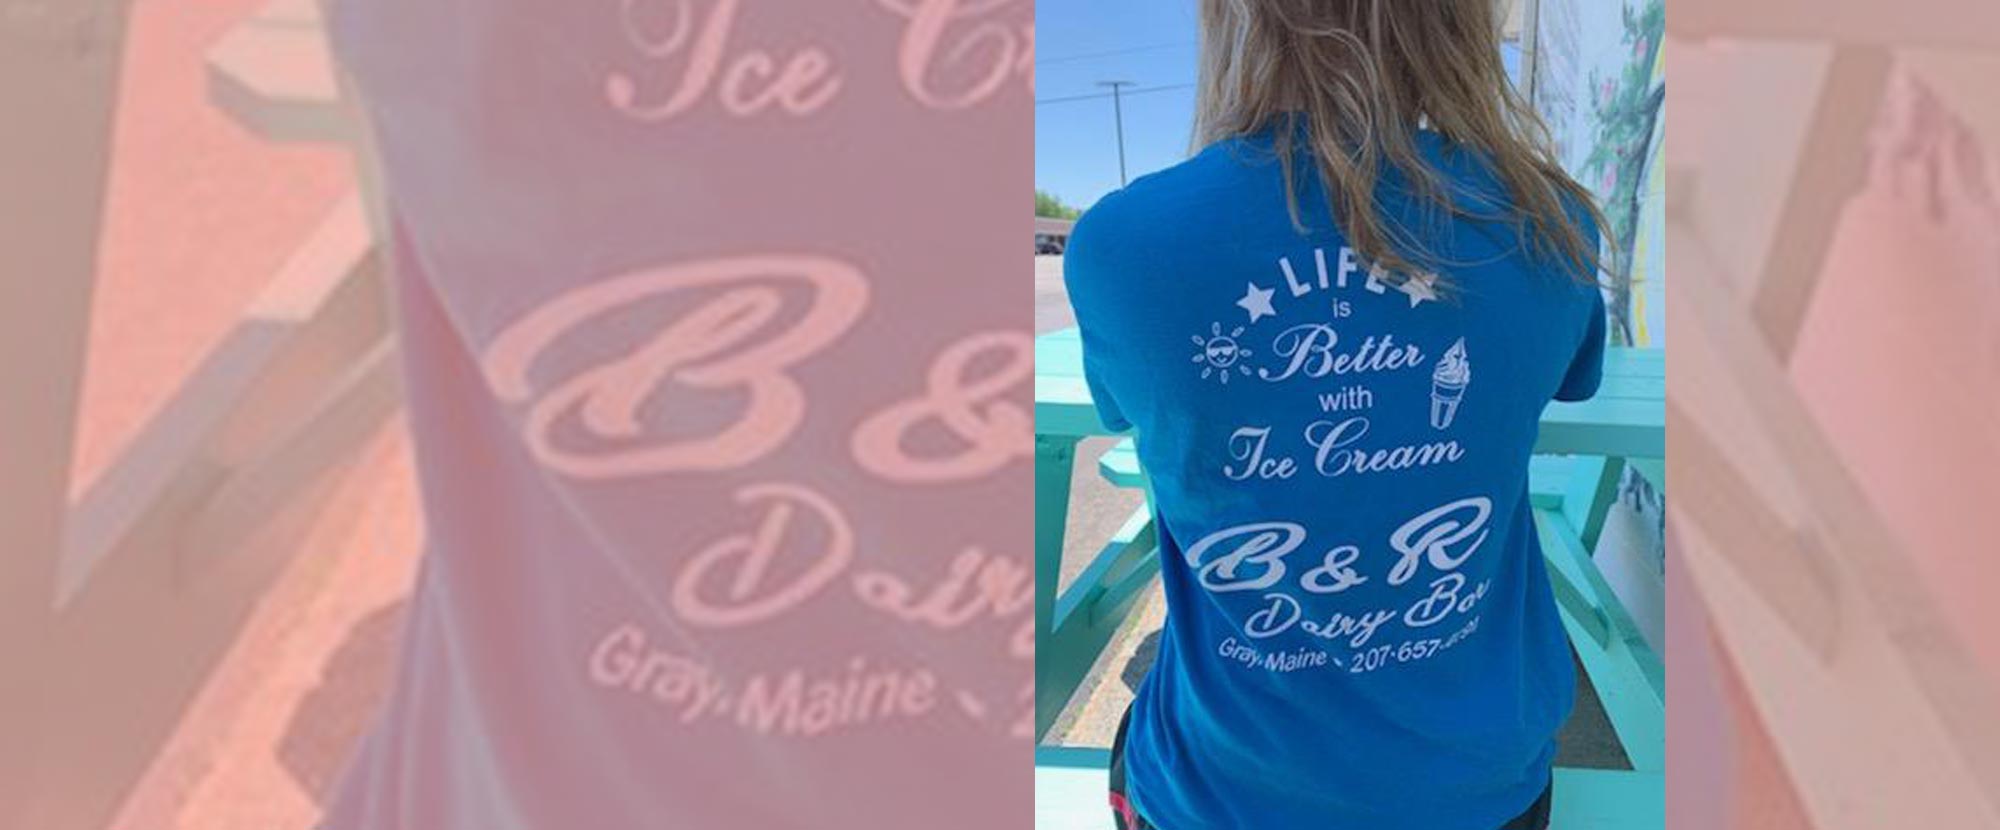 A blue B & R Dairy Bar T-shirt available for sale now in Portland, ME